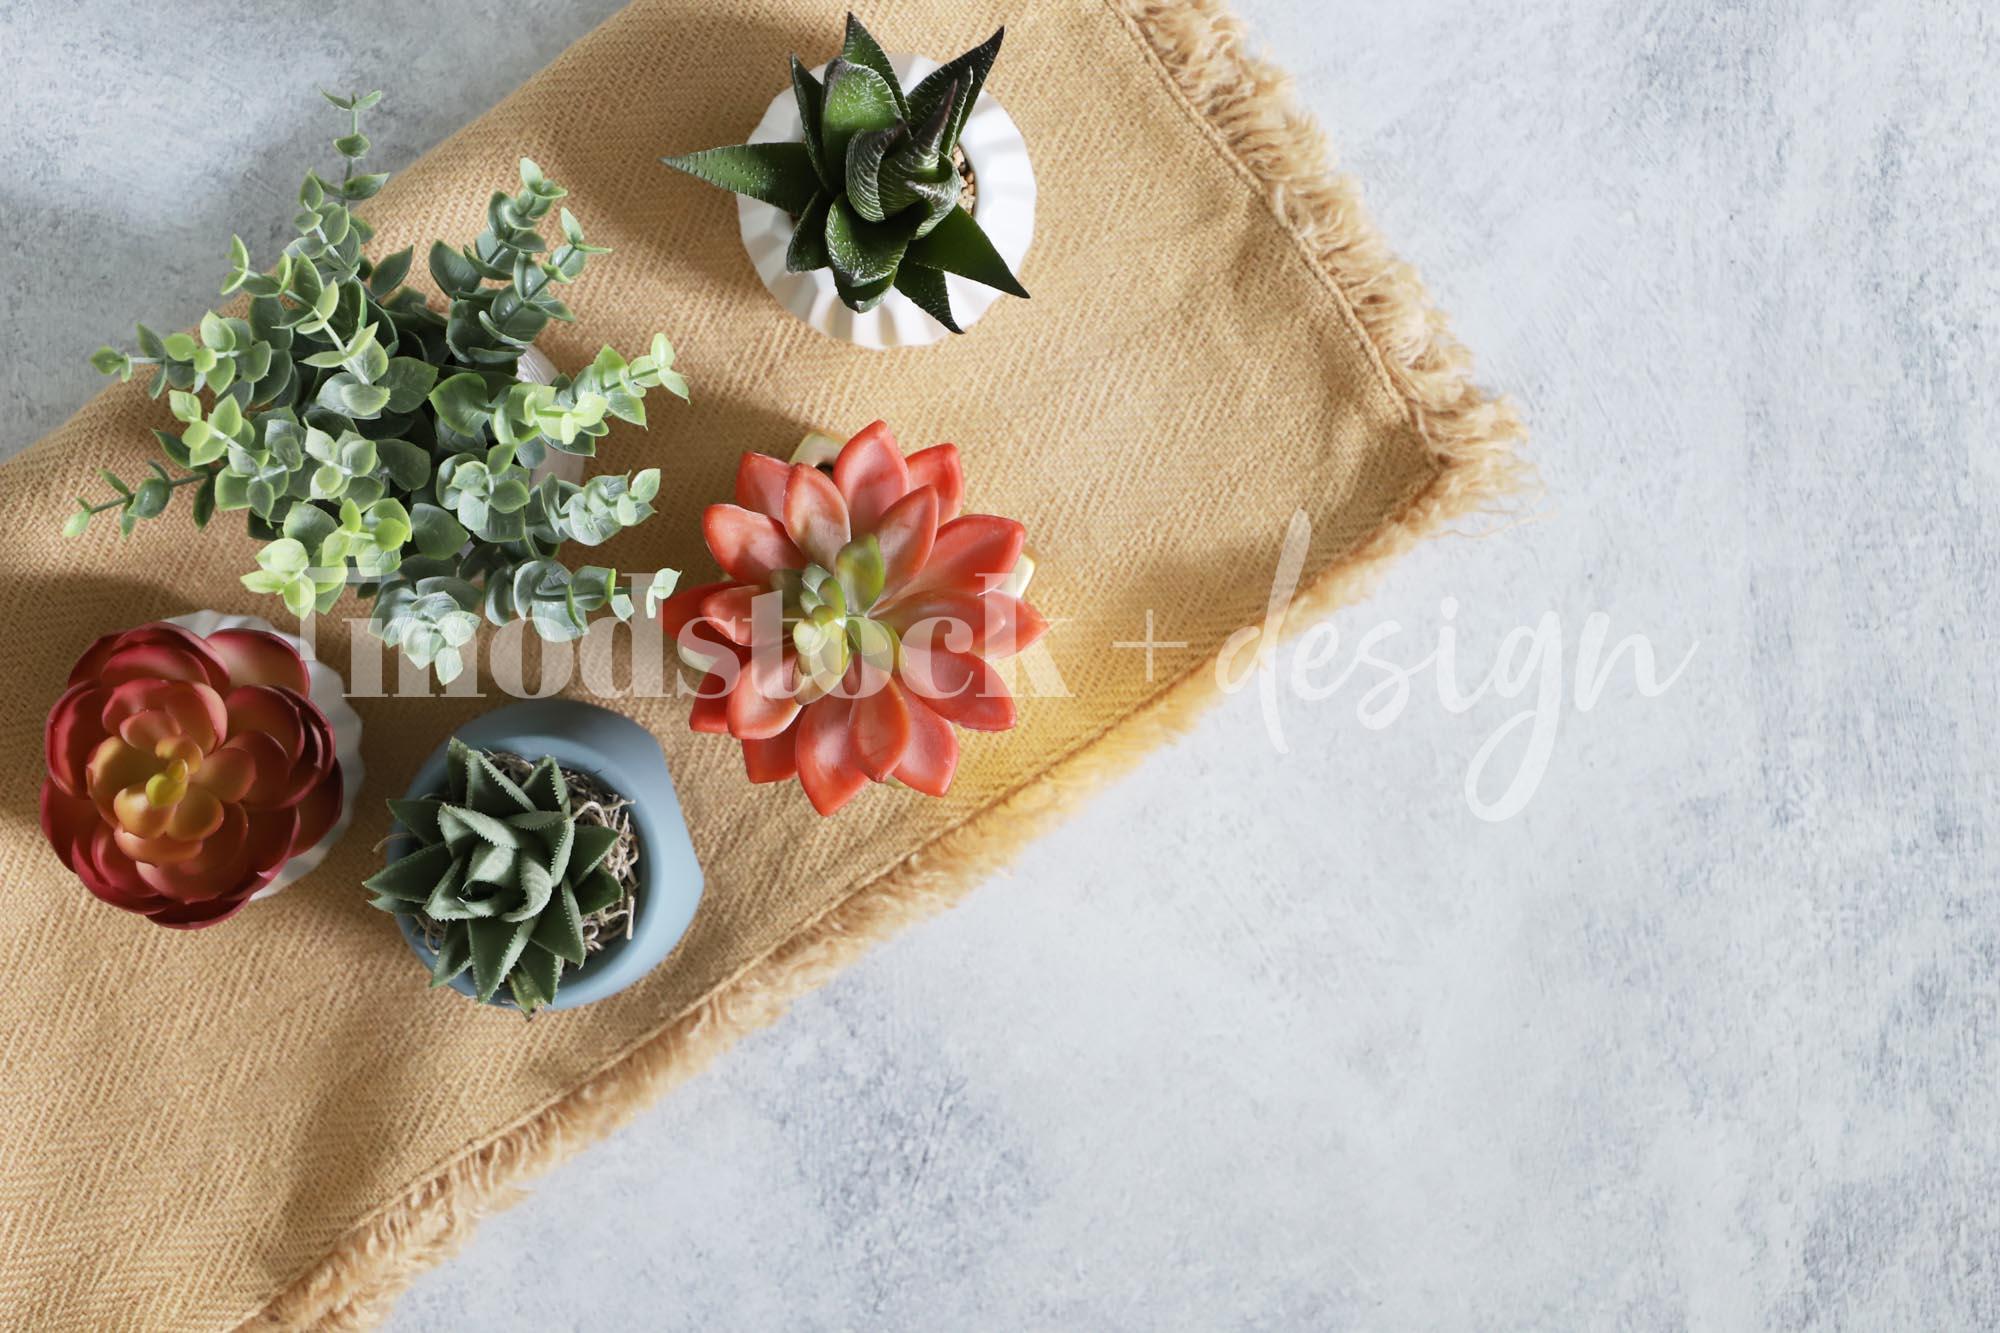 All About Succulents 20